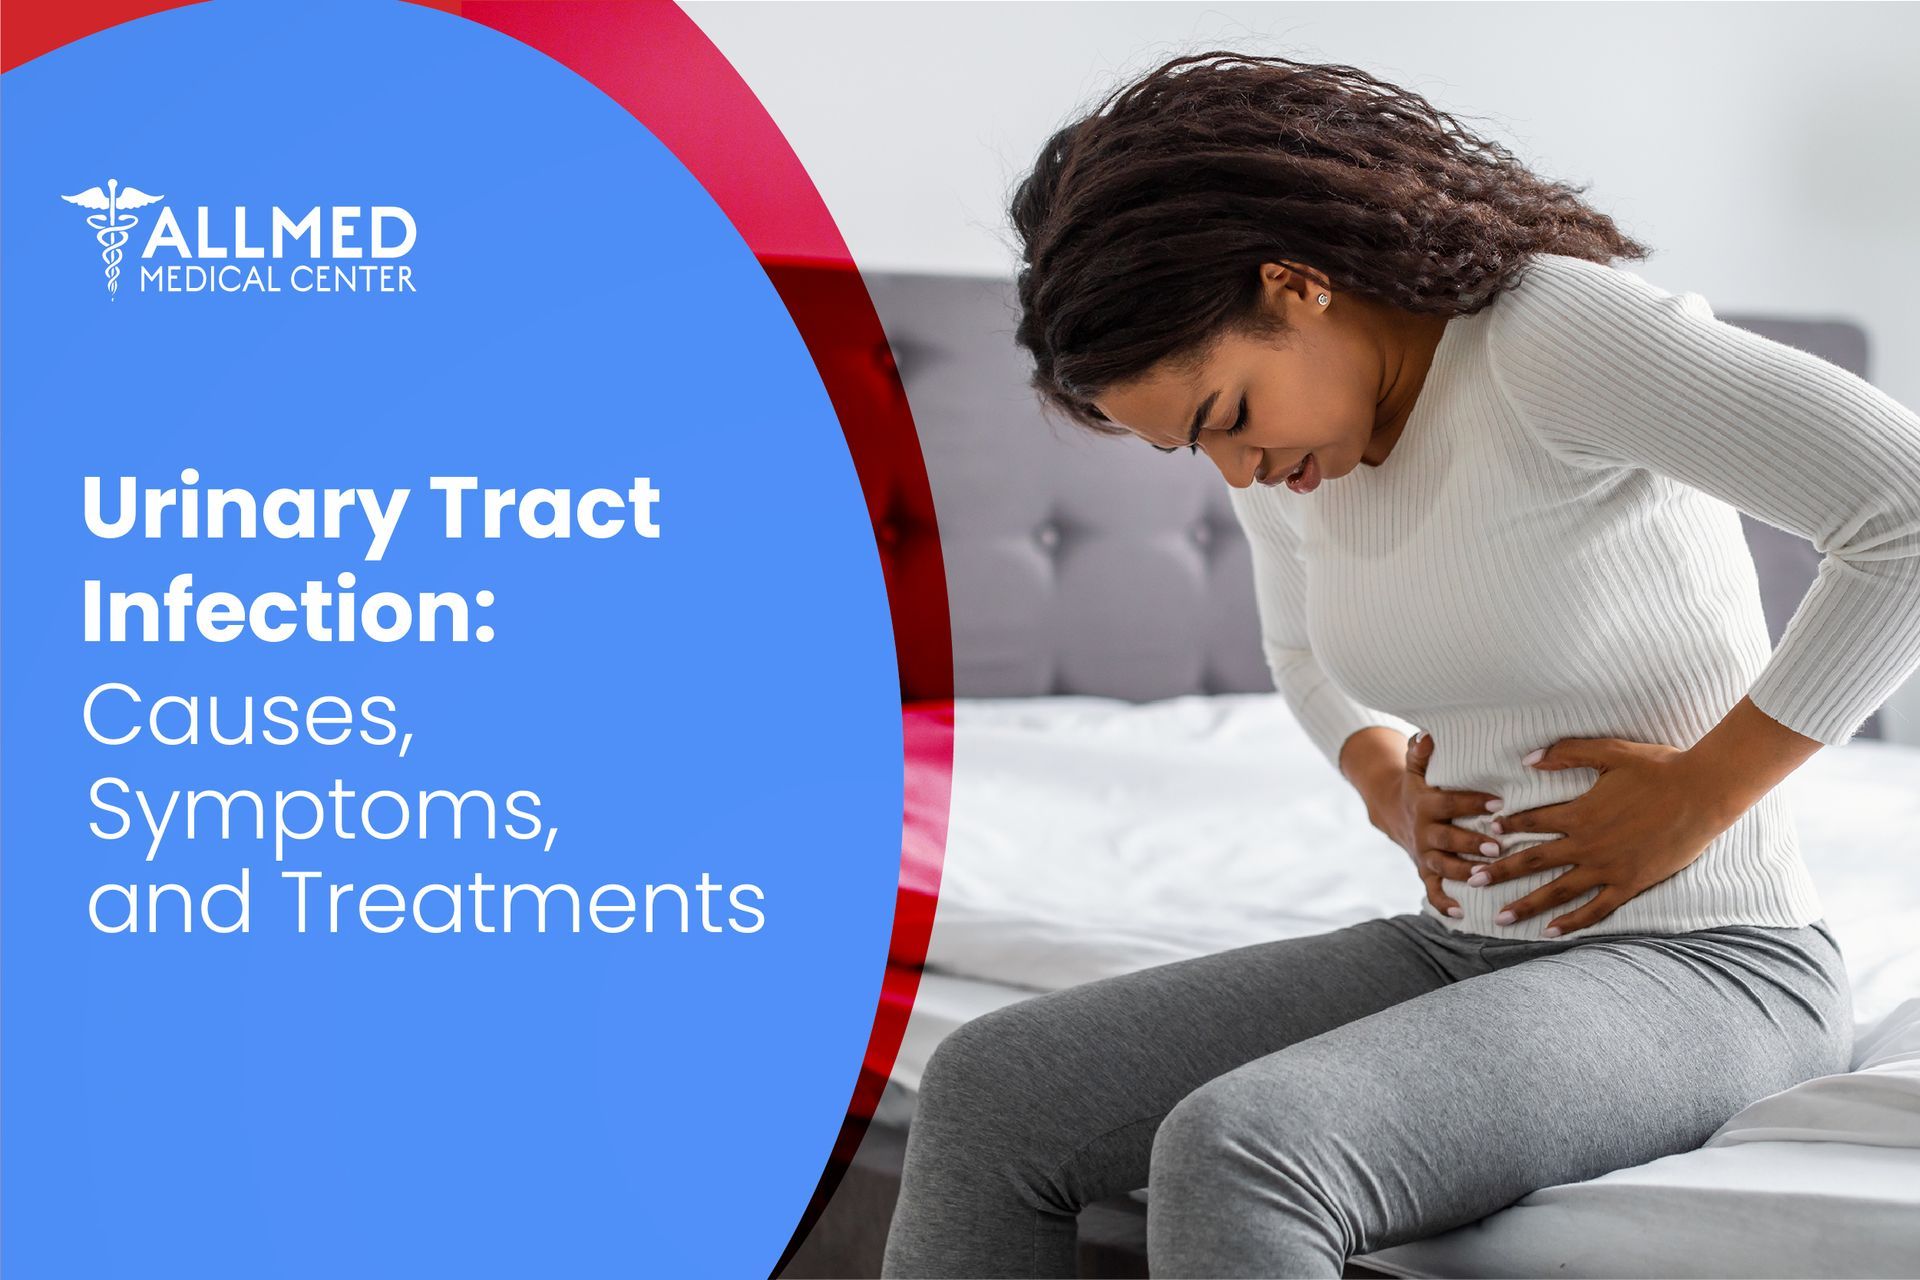 Urinary Tract Infection: Causes, Symptoms, and Treatments